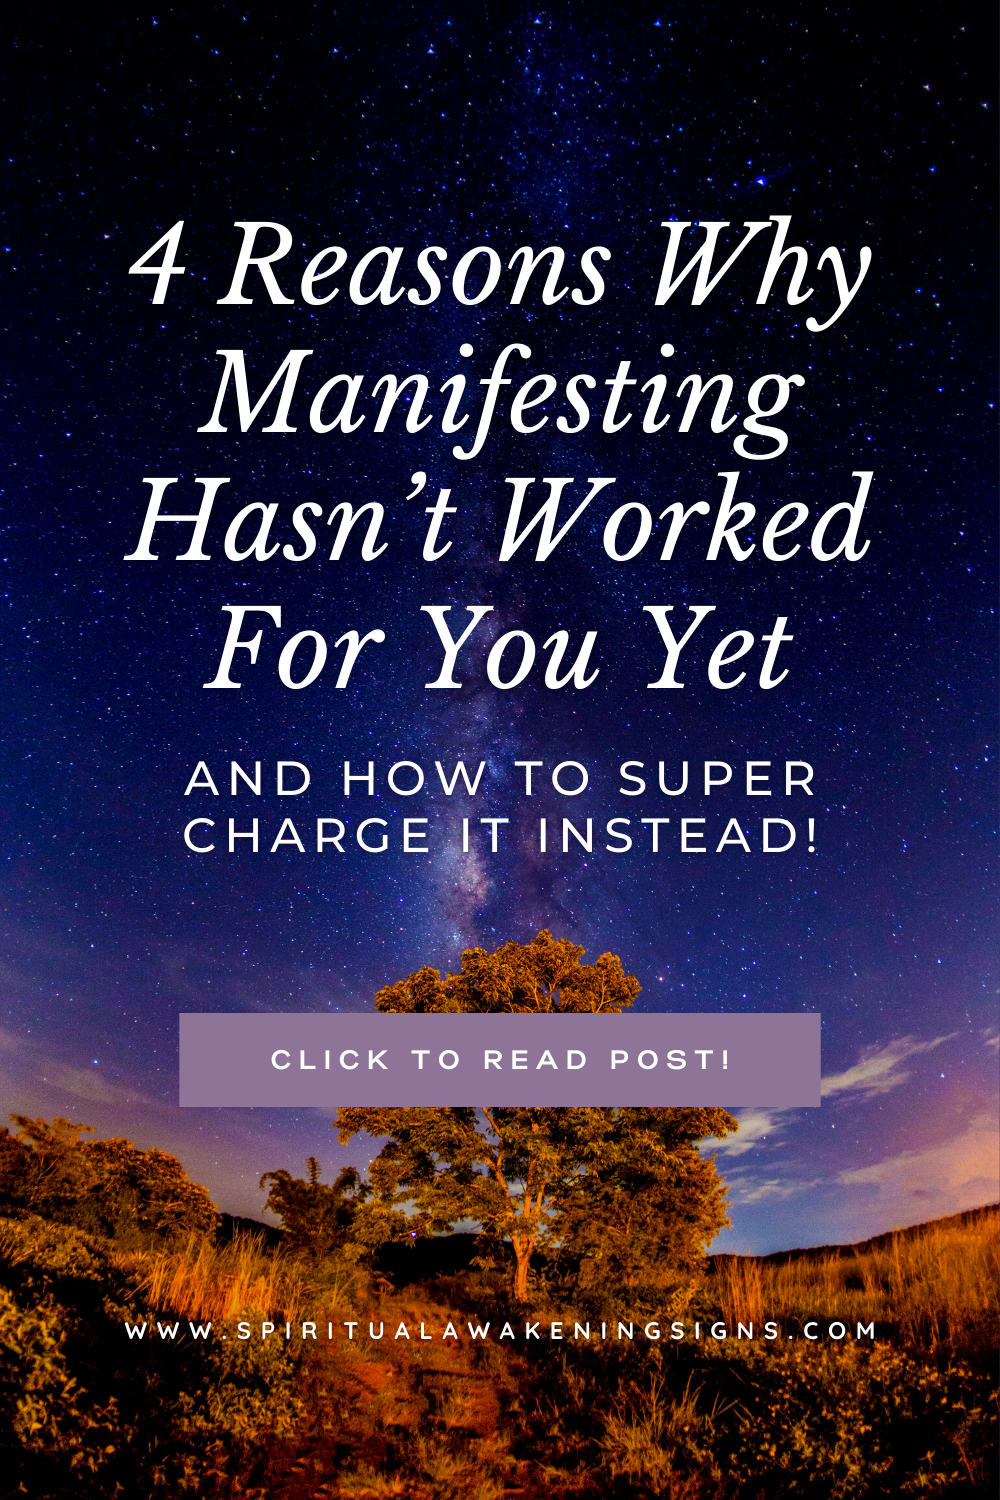 4 Reasons Why Manifesting Hasn’t Worked For You Yet (and how to super charge it instead!)